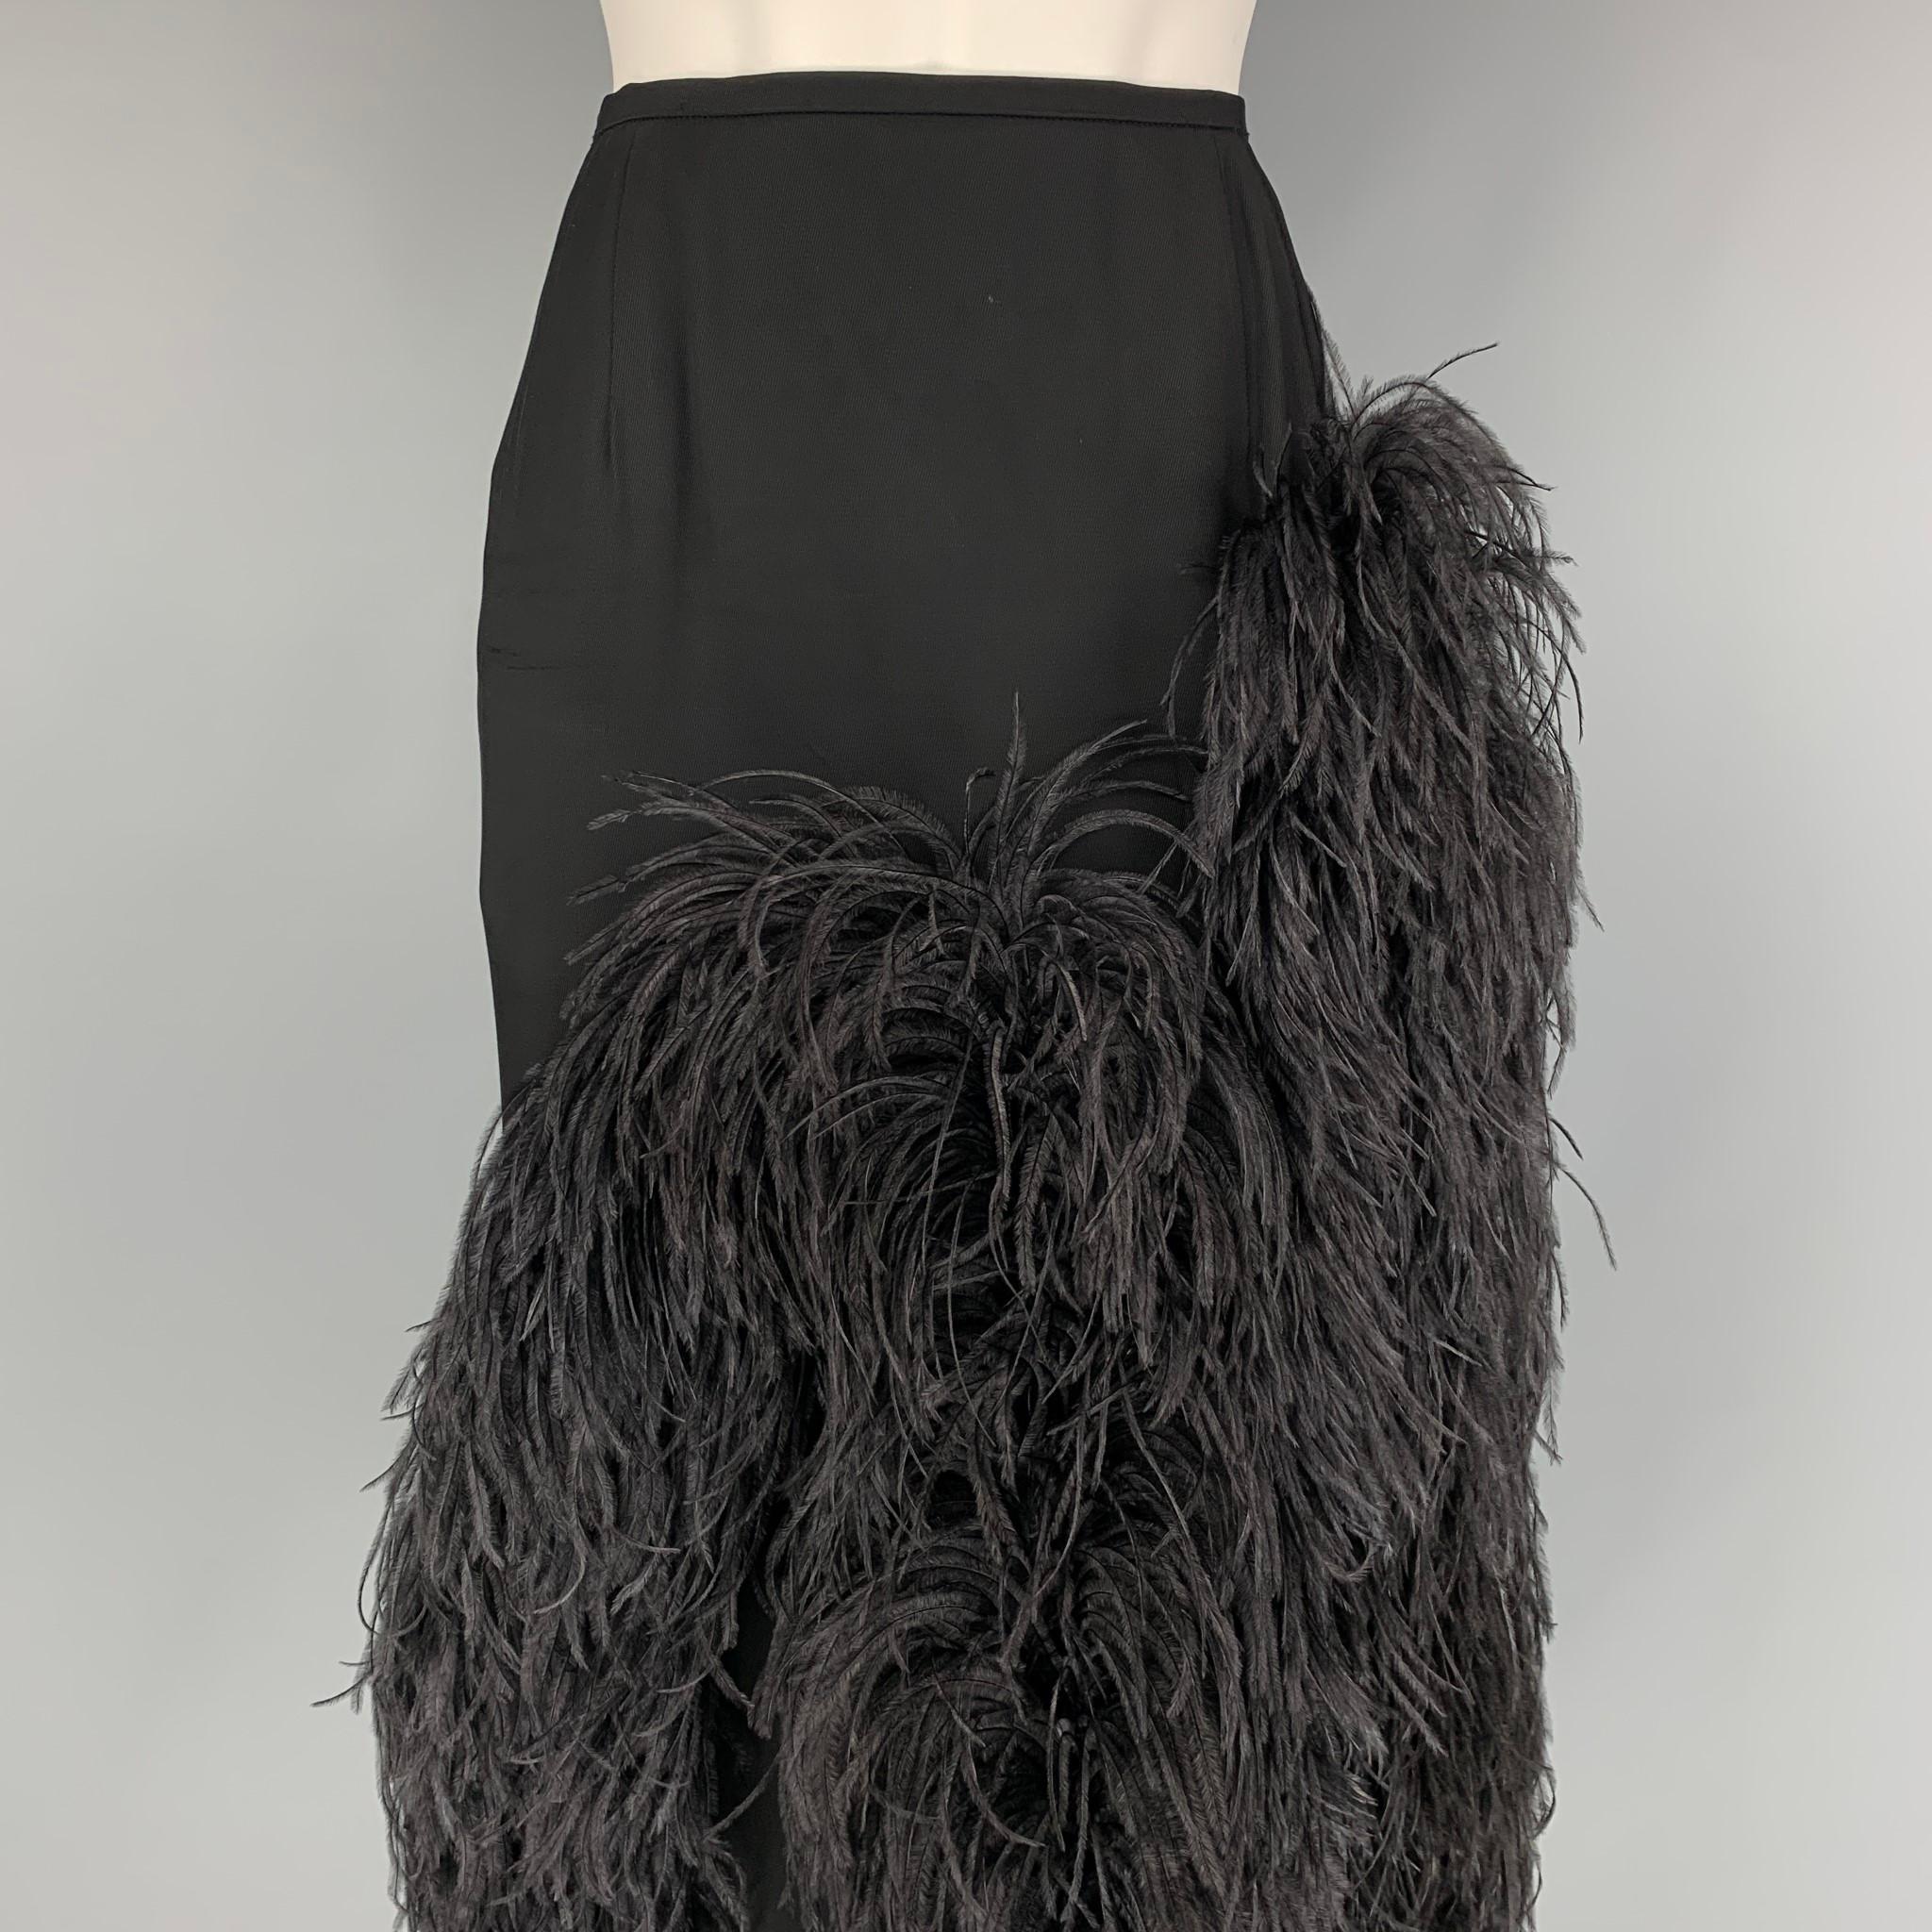 DRIES VAN NOTEN x Christian LaCroix skirt comes in a black viscose with a slip liner featuring a front feather design, front pleats, side slit, and a back zip up closure. Made in Belgium.

Very Good Pre-Owned Condition.
Marked: